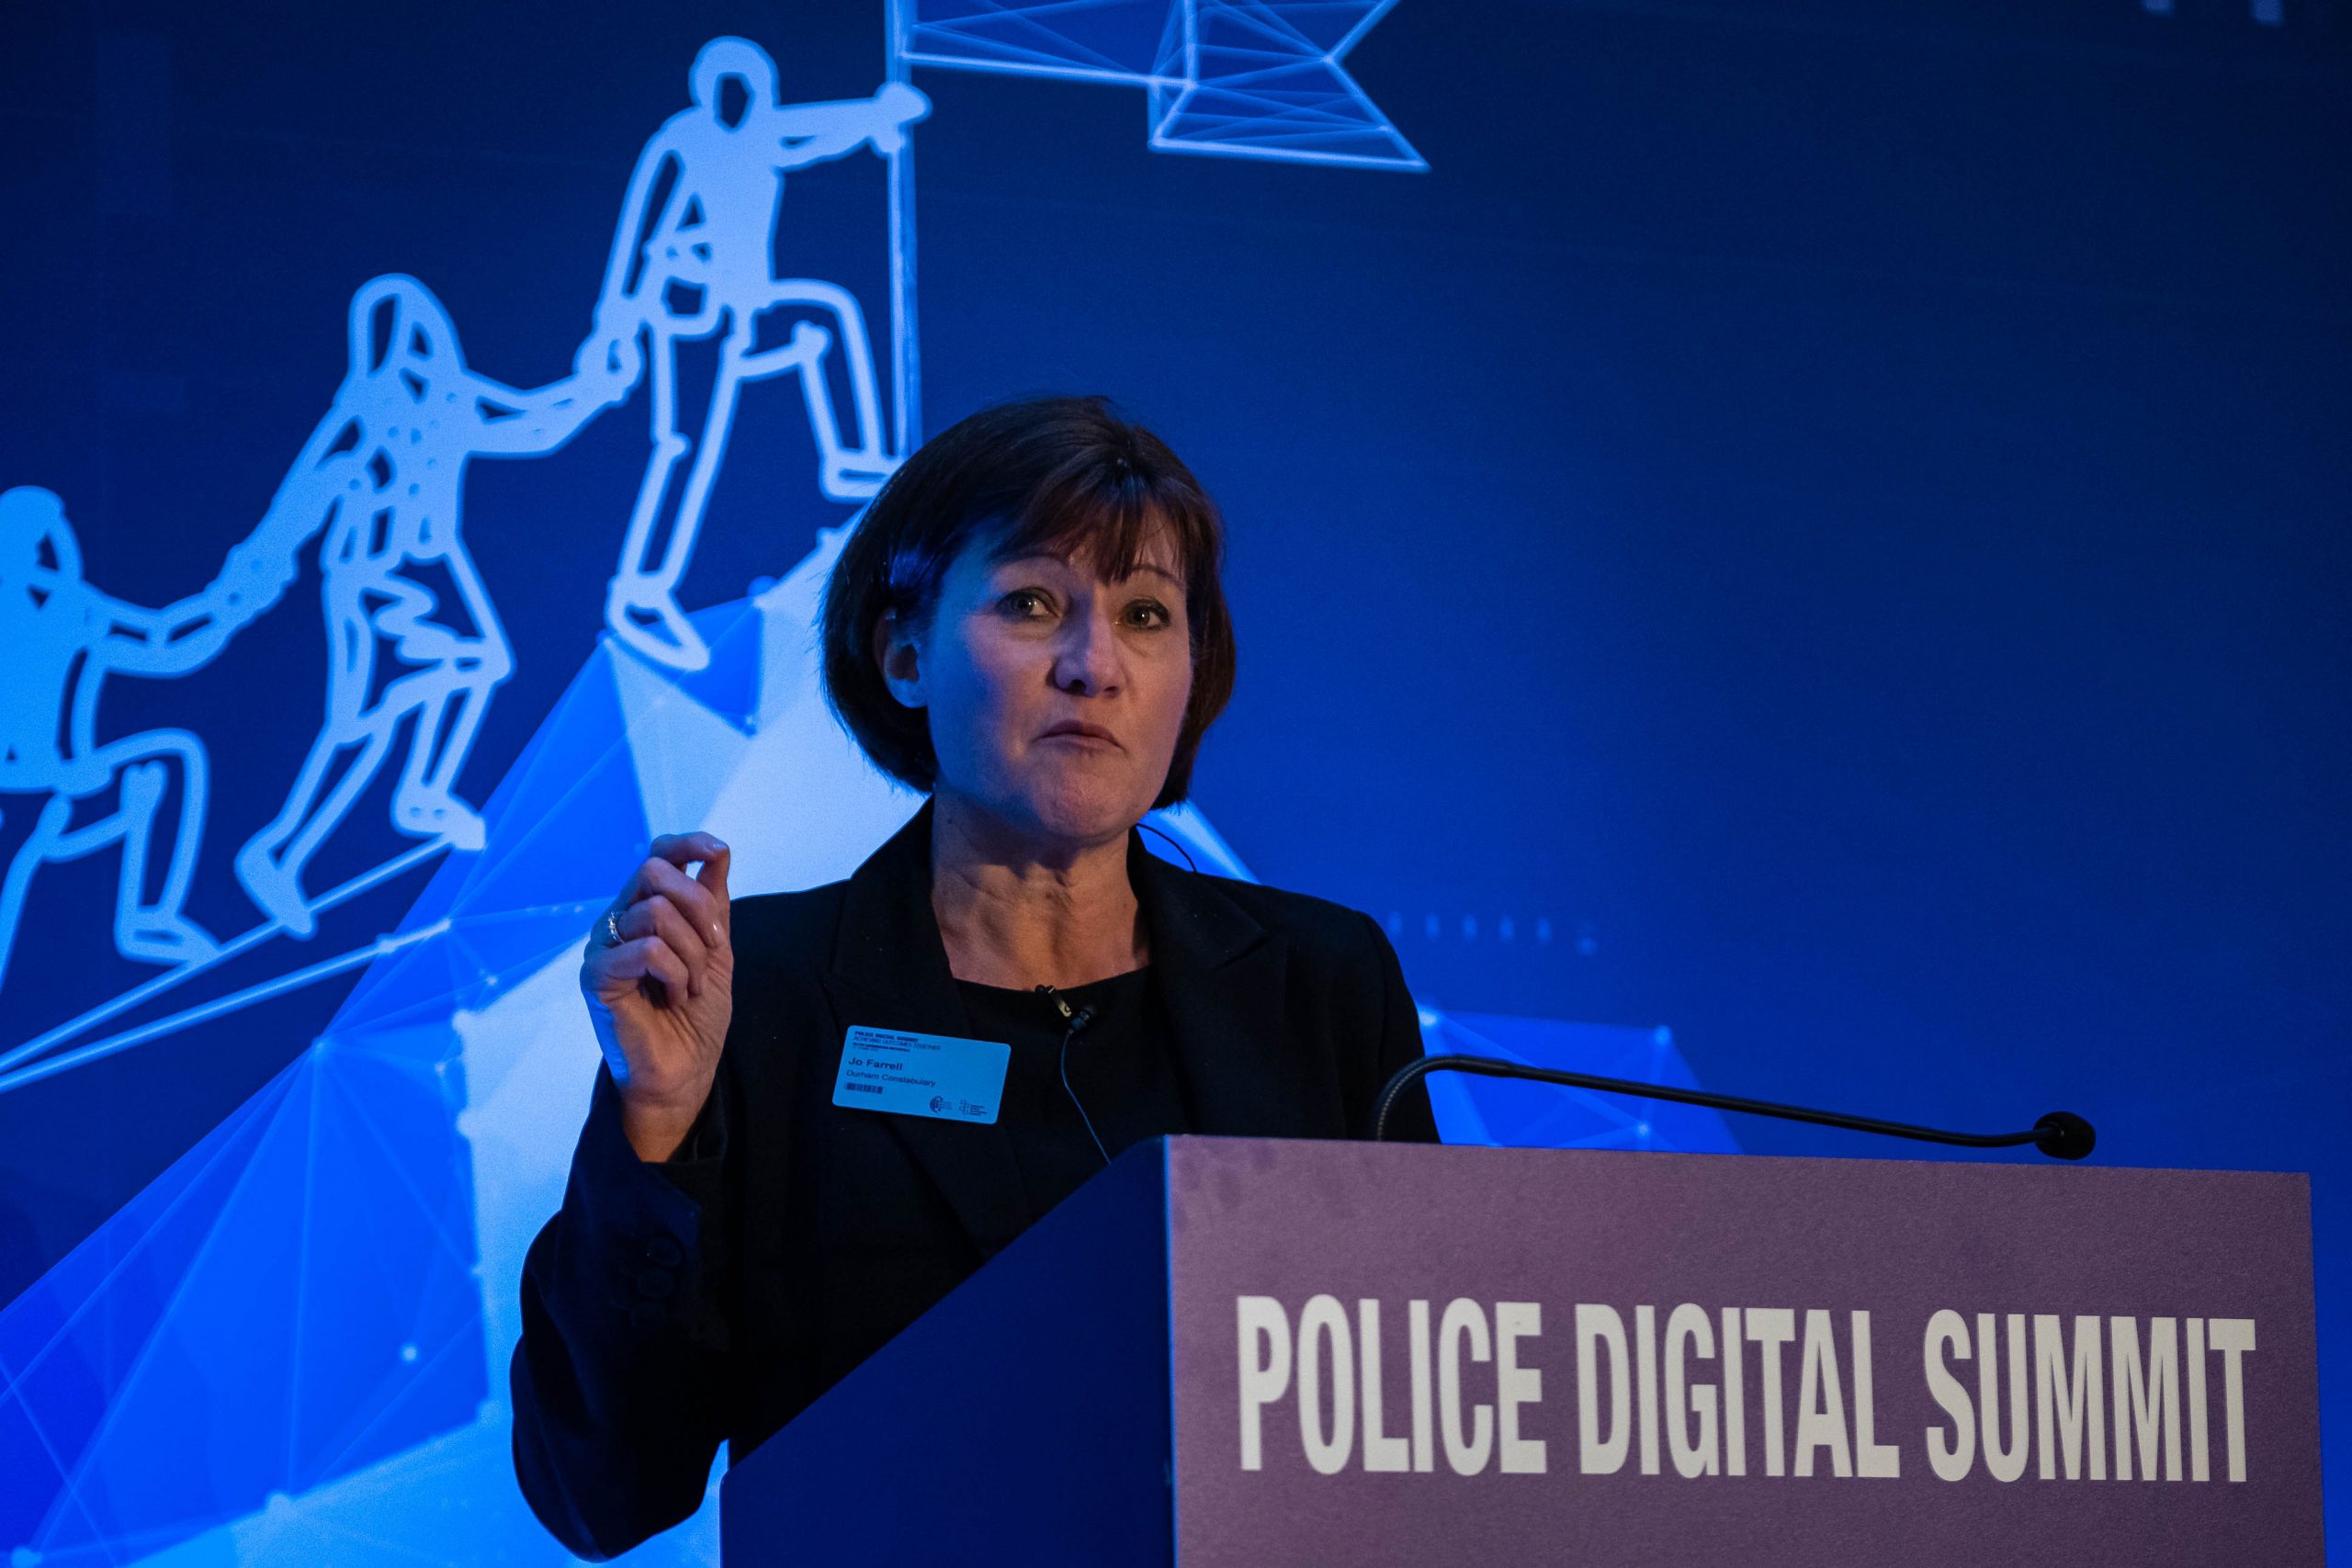 Jo Farrell, Chief Constable Durham Constabulary and Chair of Information Management and Operational Requirements Co-ordination Committee (IMORCC).